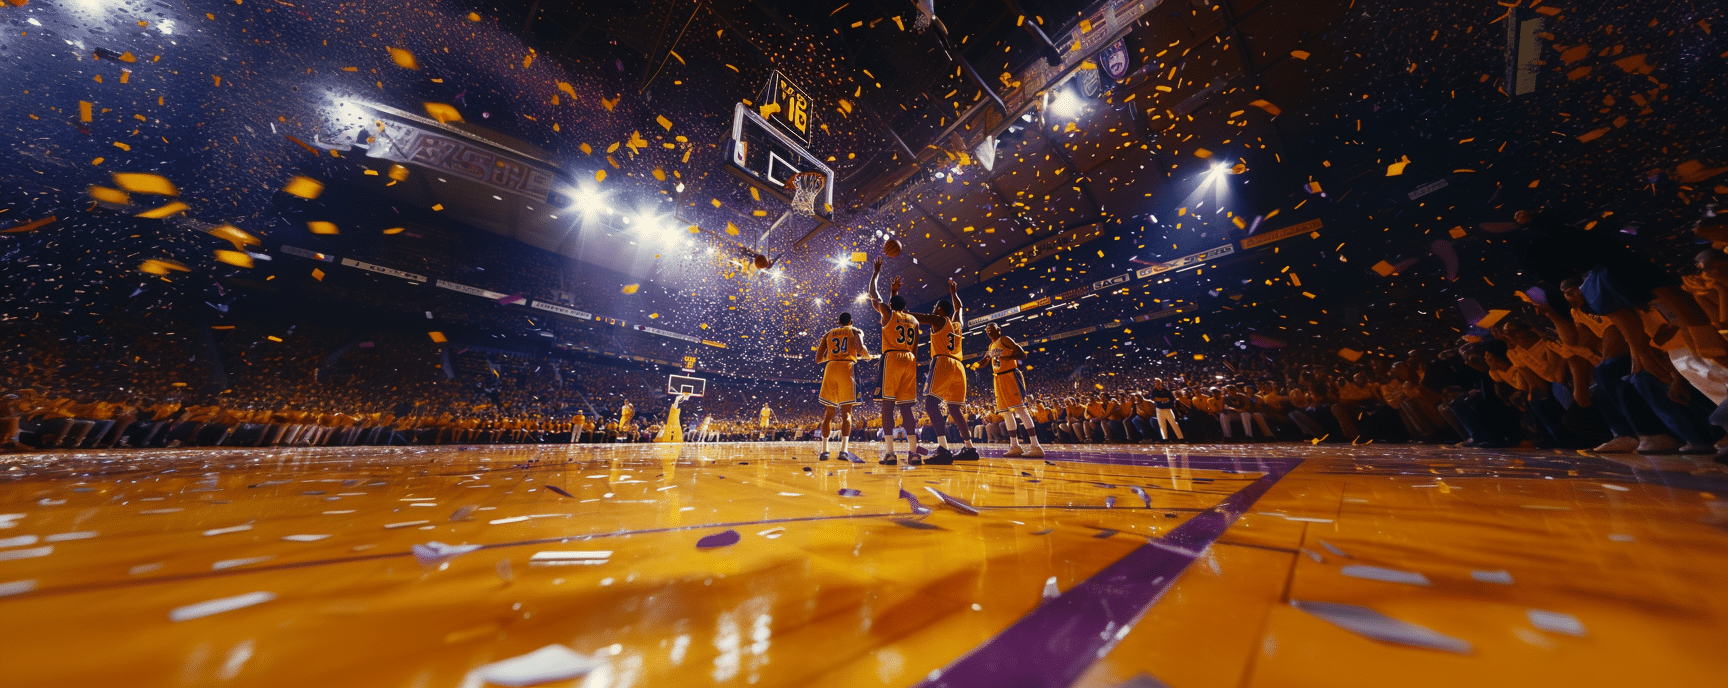 the Lakers secured five NBA championships in the seasons of 1980, 1982, 1985, 1987, and 1988. The Lakers became renowned for their dynamic, fast-paced offensive style, captivating basketball fans across the globe.